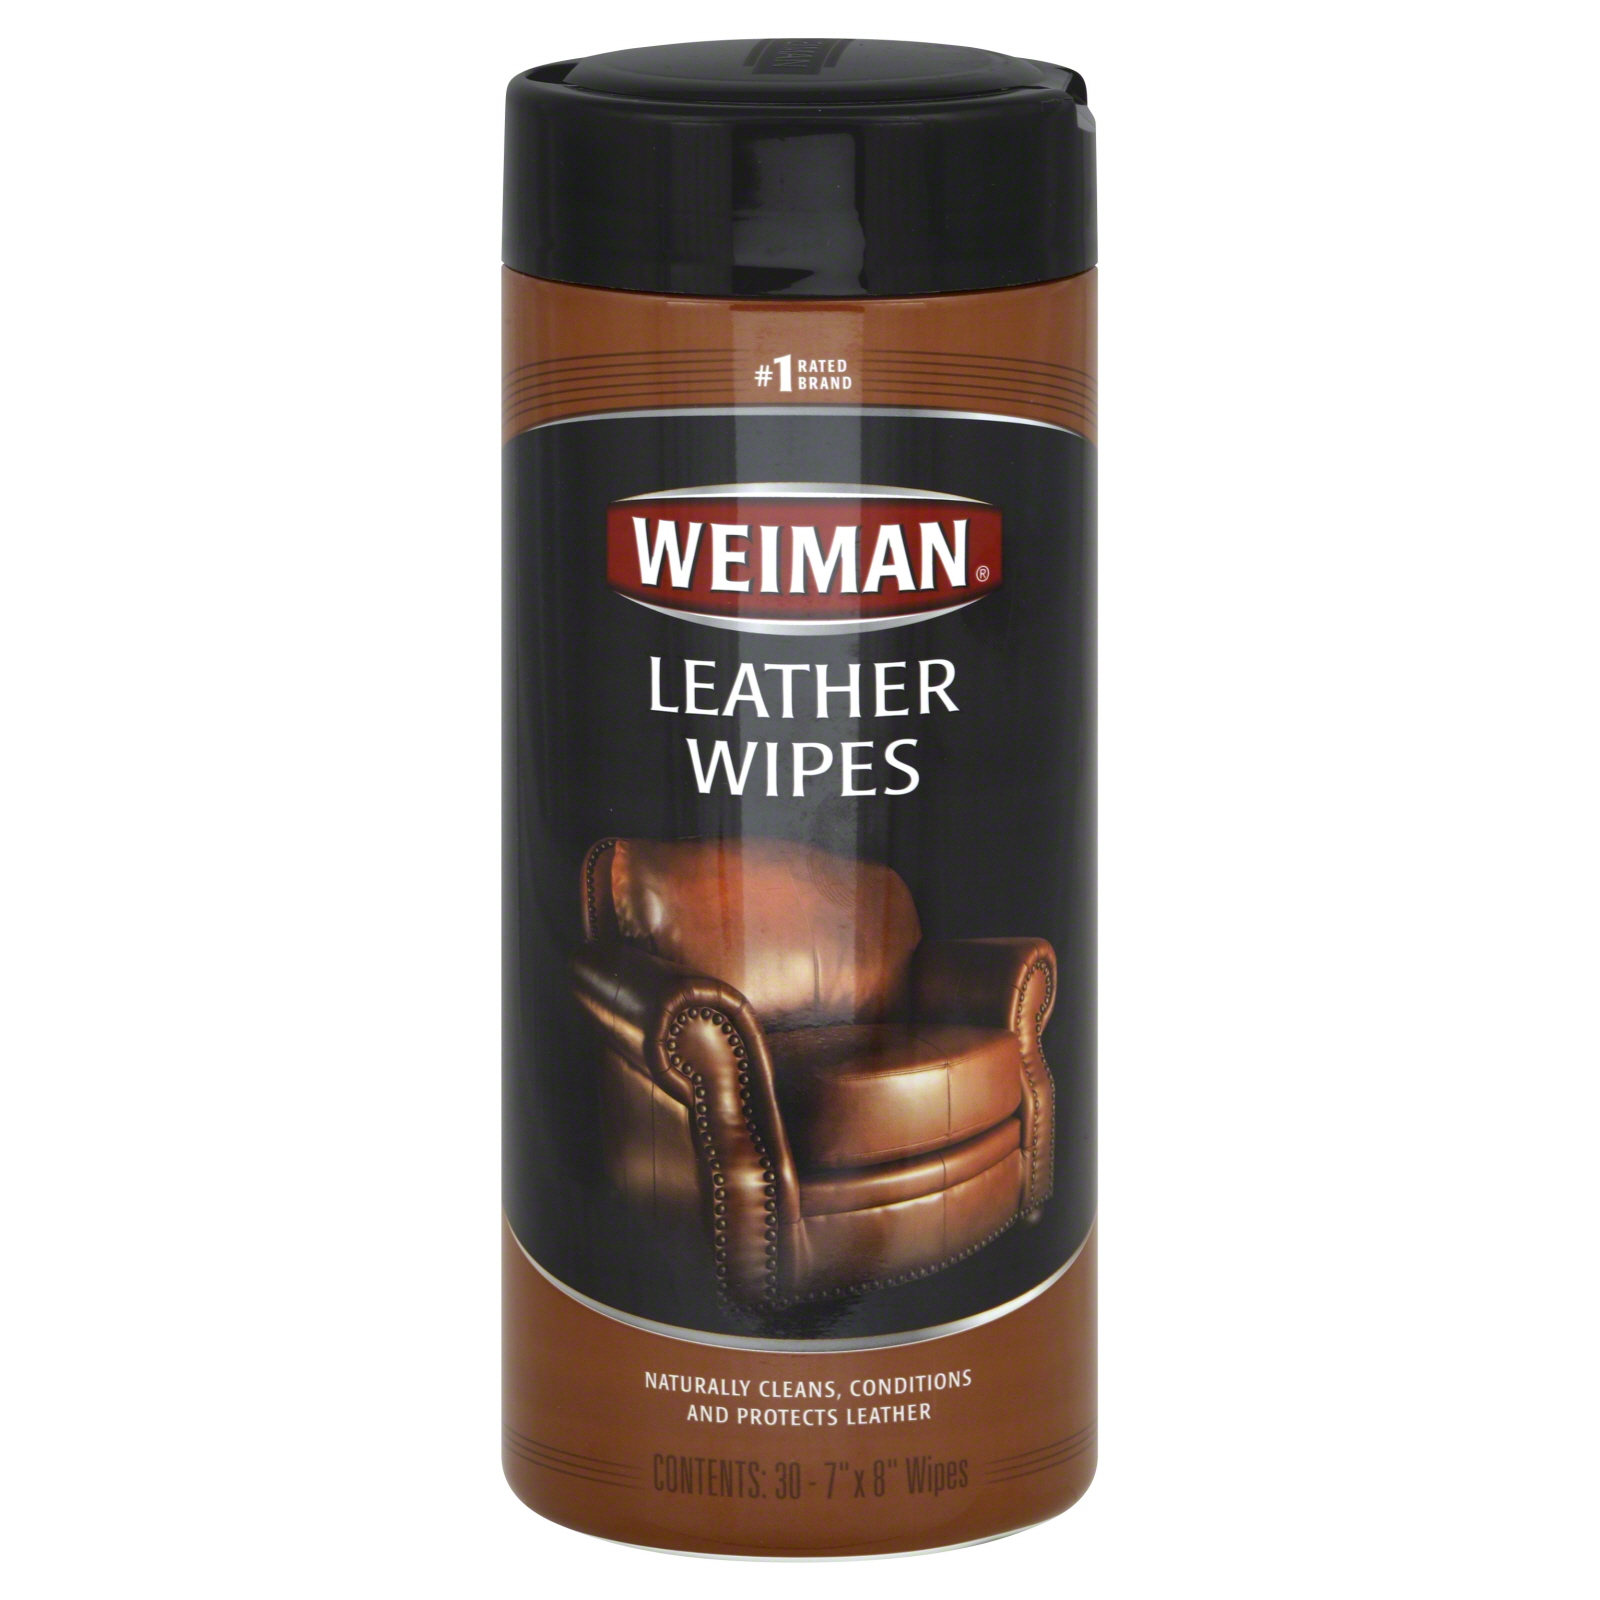 Weiman Leather Wipes, 30 wipes